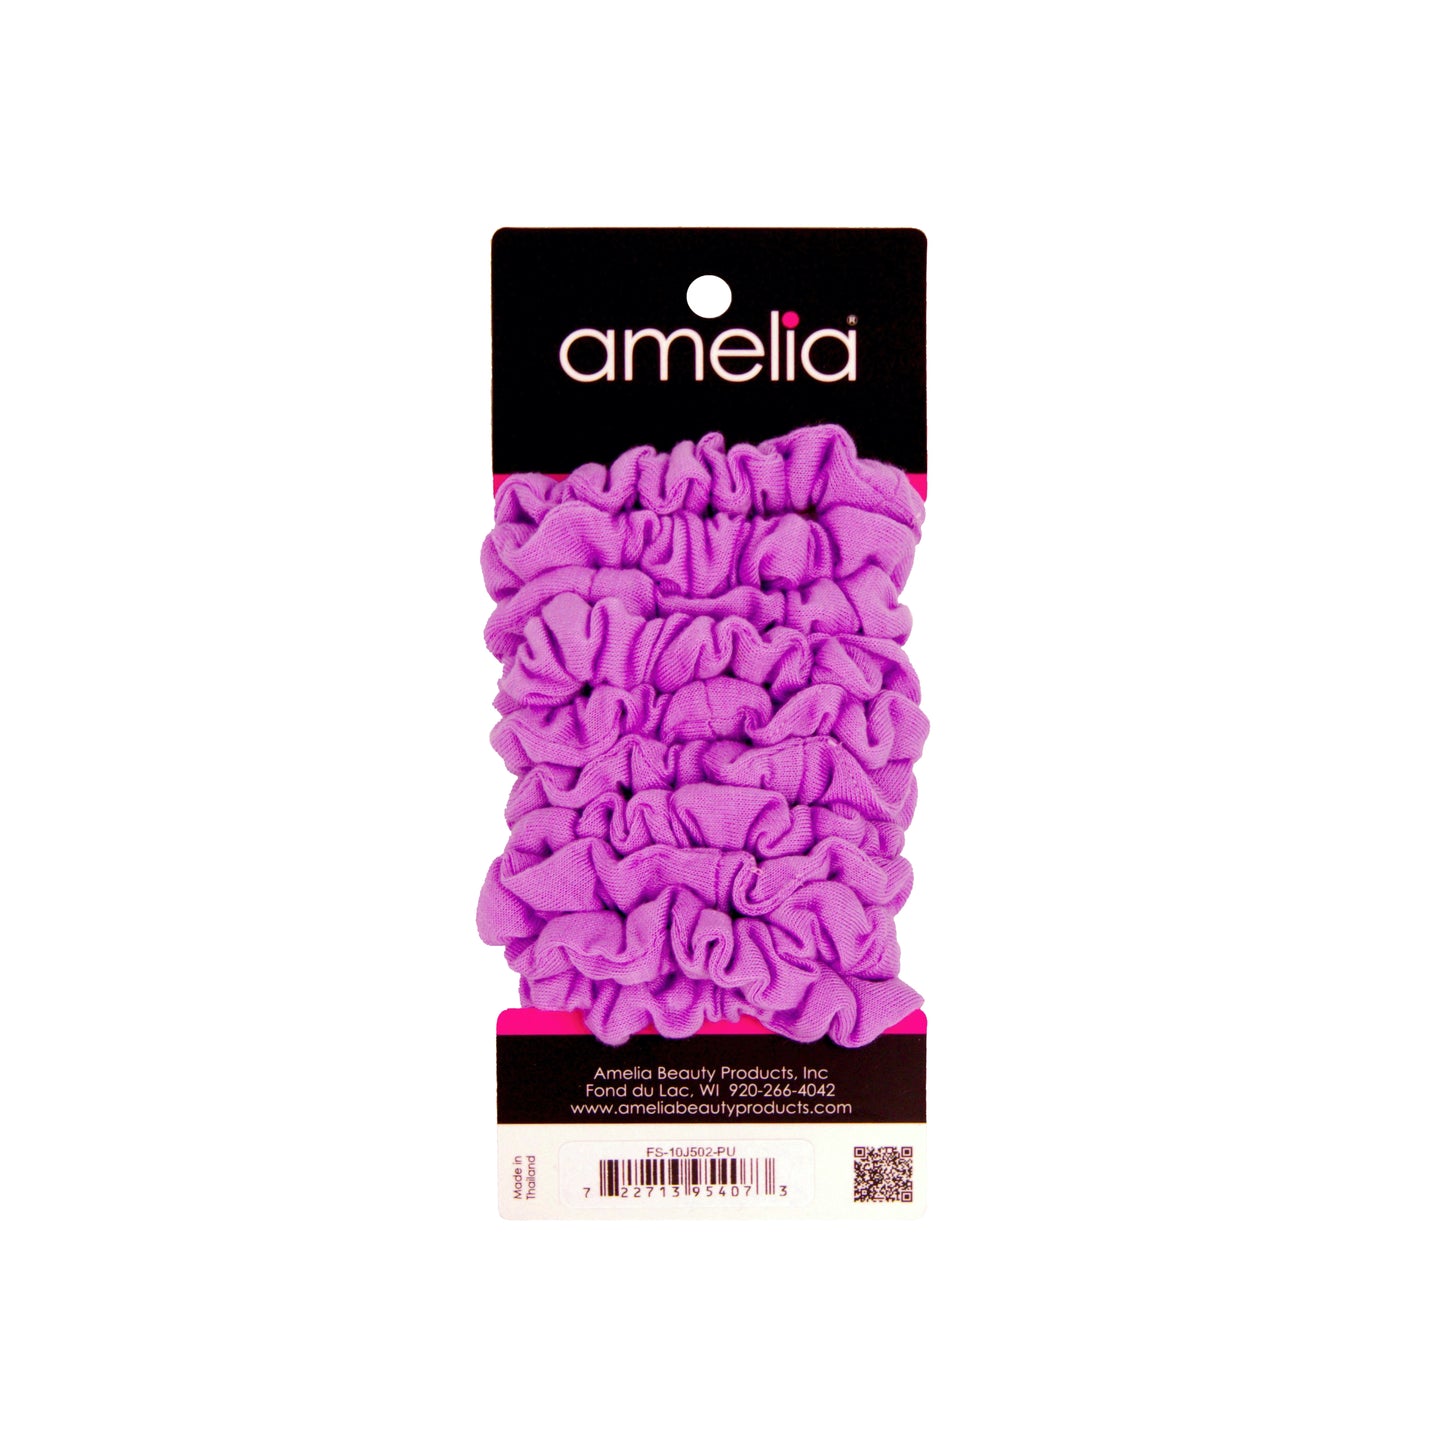 Amelia Beauty, Medium Purple Jersey Scrunchies, 2.5in Diameter, Gentle on Hair, Strong Hold, No Snag, No Dents or Creases. 10 Pack